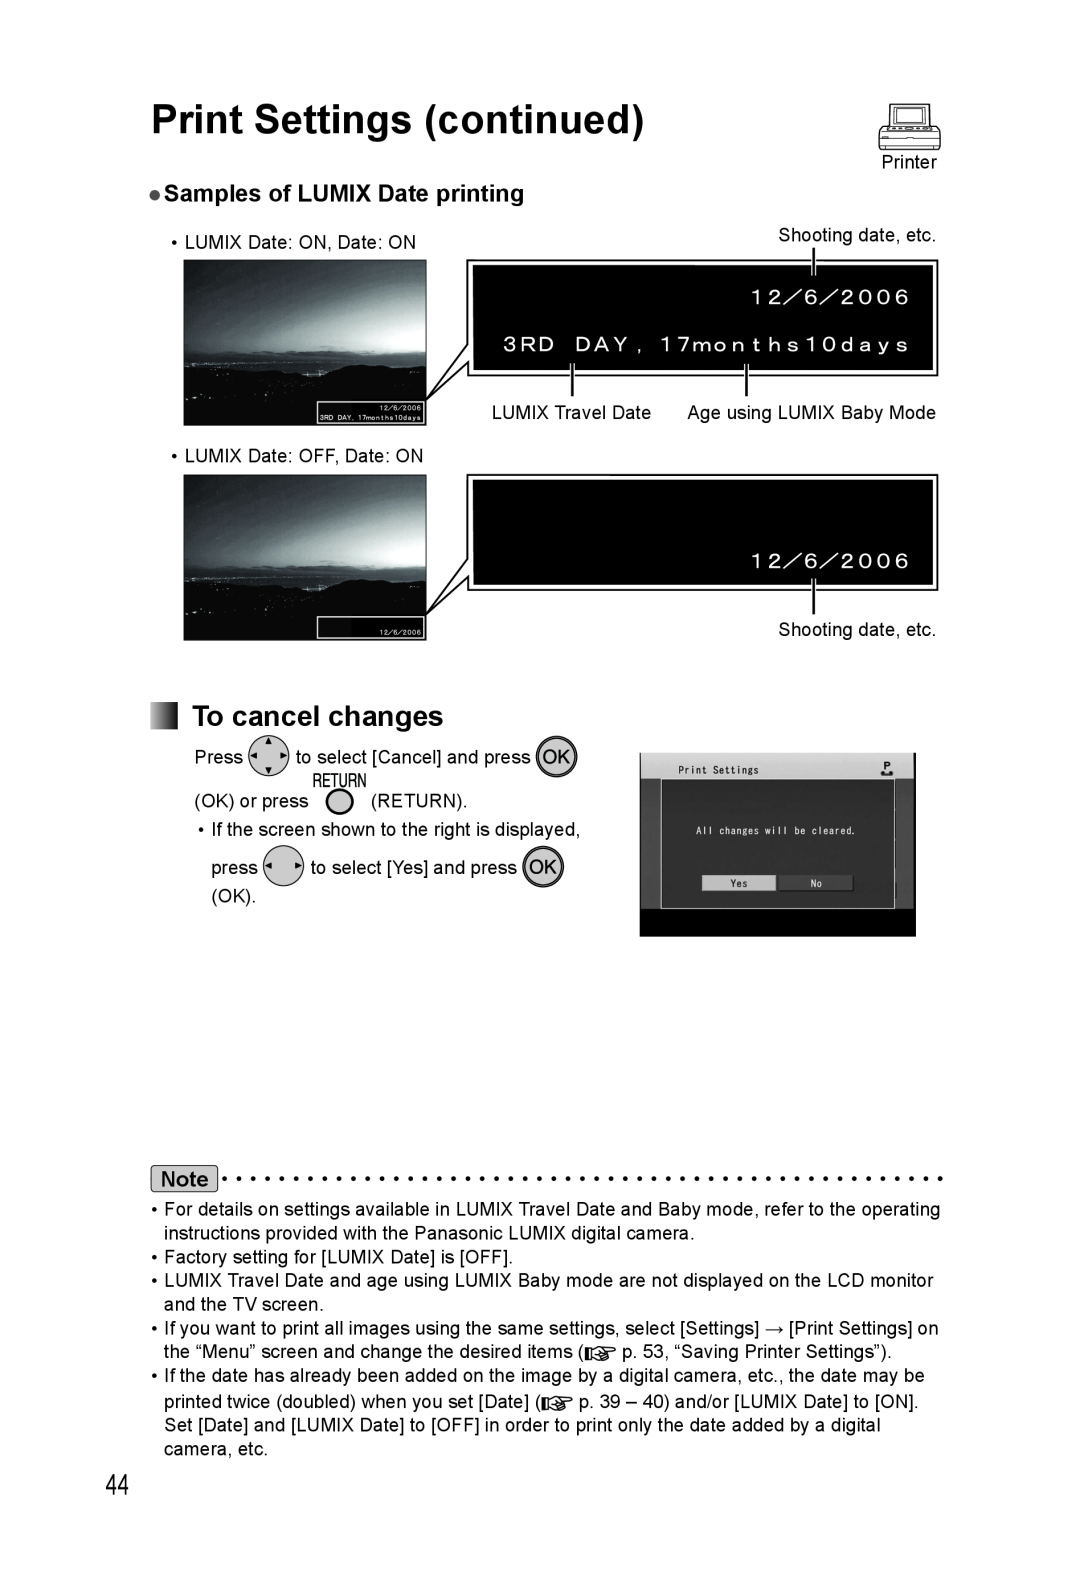 Panasonic KX-PX20M Samples of LUMIX Date printing, Print Settings continued, To cancel changes, Shooting date, etc 